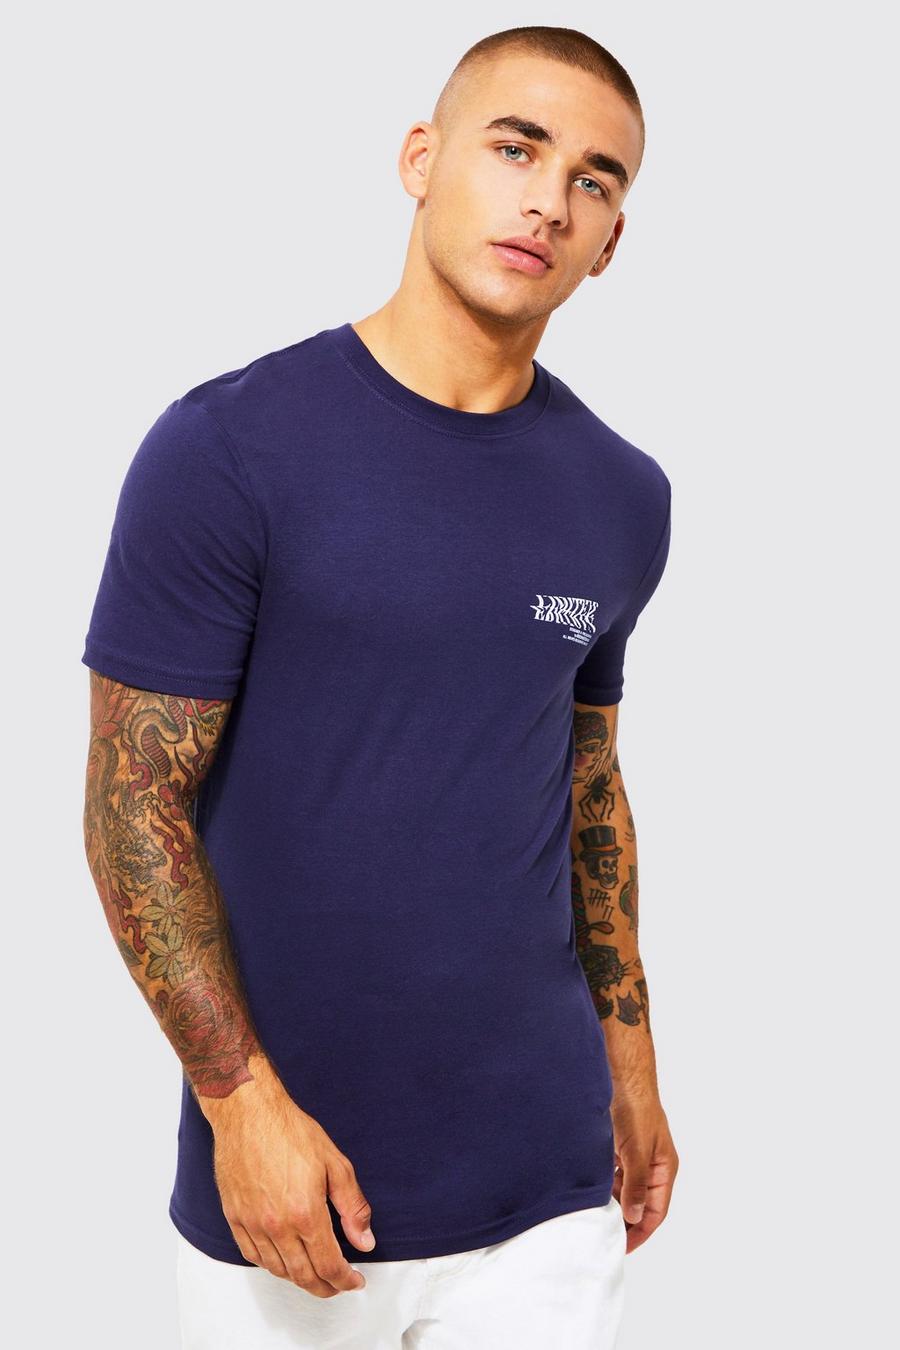 Navy T-shirt i muscle fit med tryck